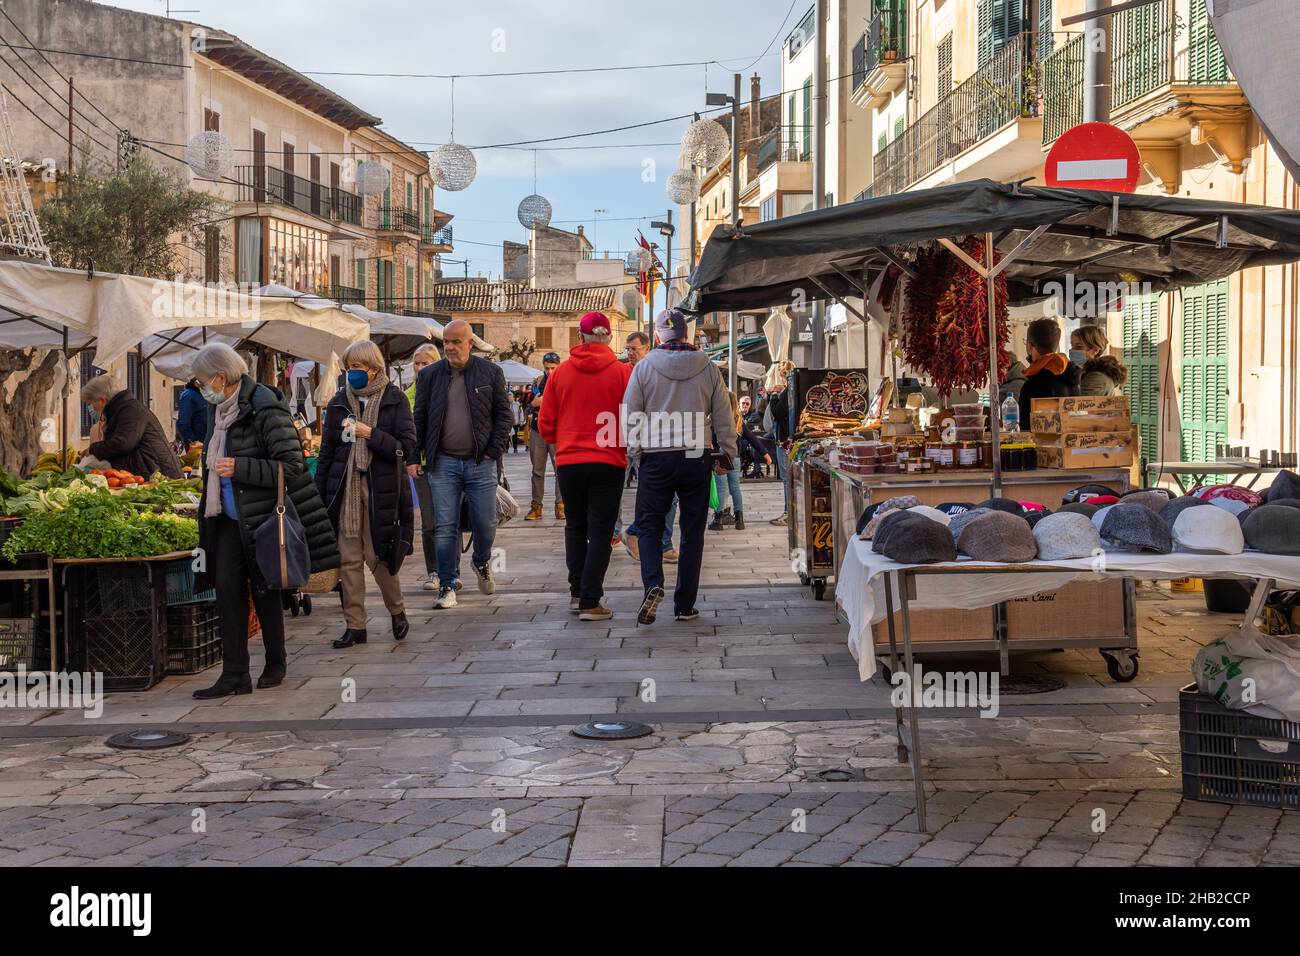 Santanyi, Spain; december 11 2021: Weekly street market in the Mallorcan town of Santanyi, during the winter Christmas season. Stalls selling fresh an Stock Photo